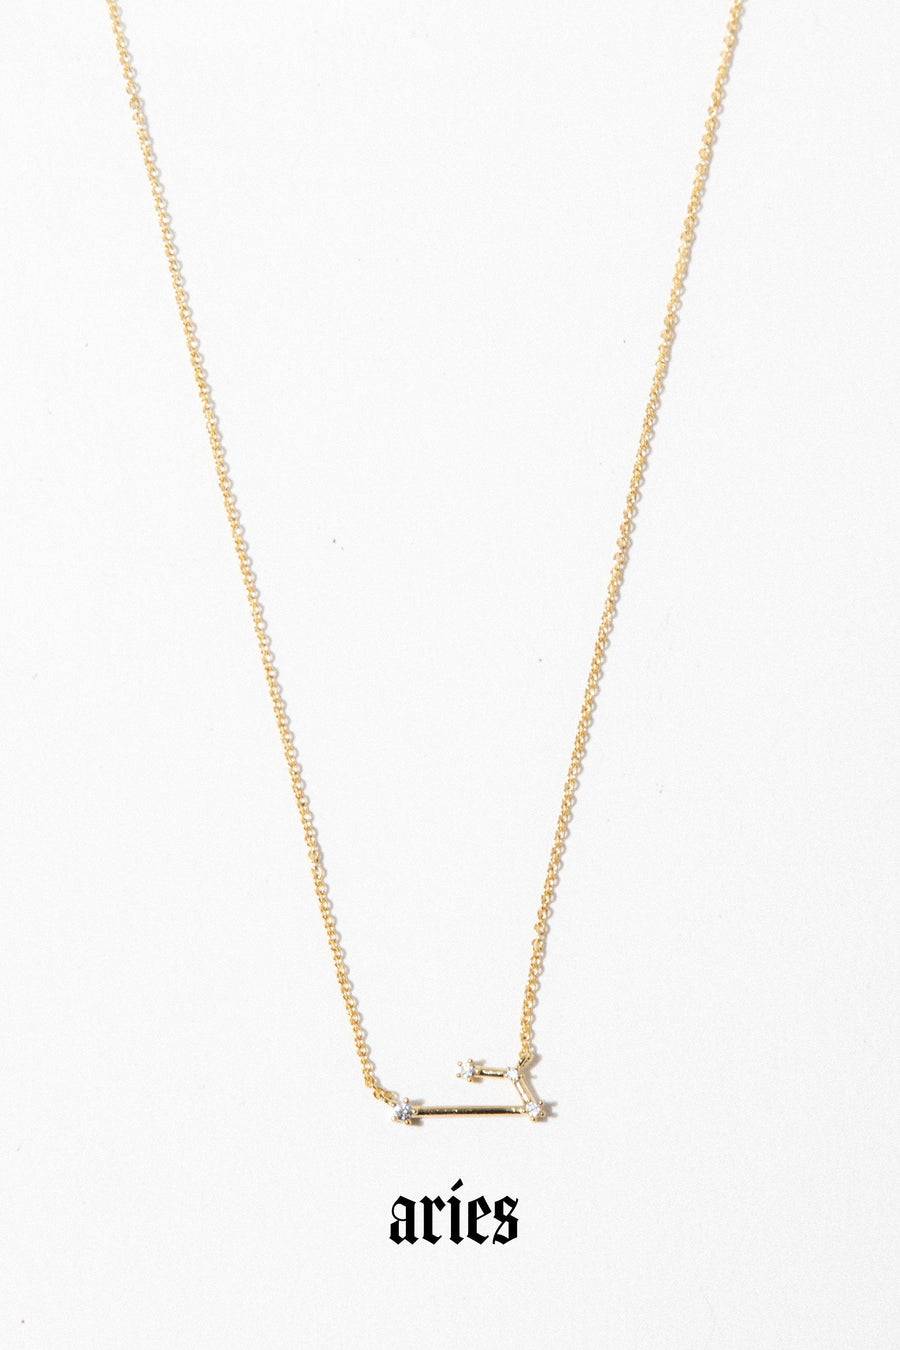 charis Jewelry Aries / 16 Inches / Gold Constellation Necklace